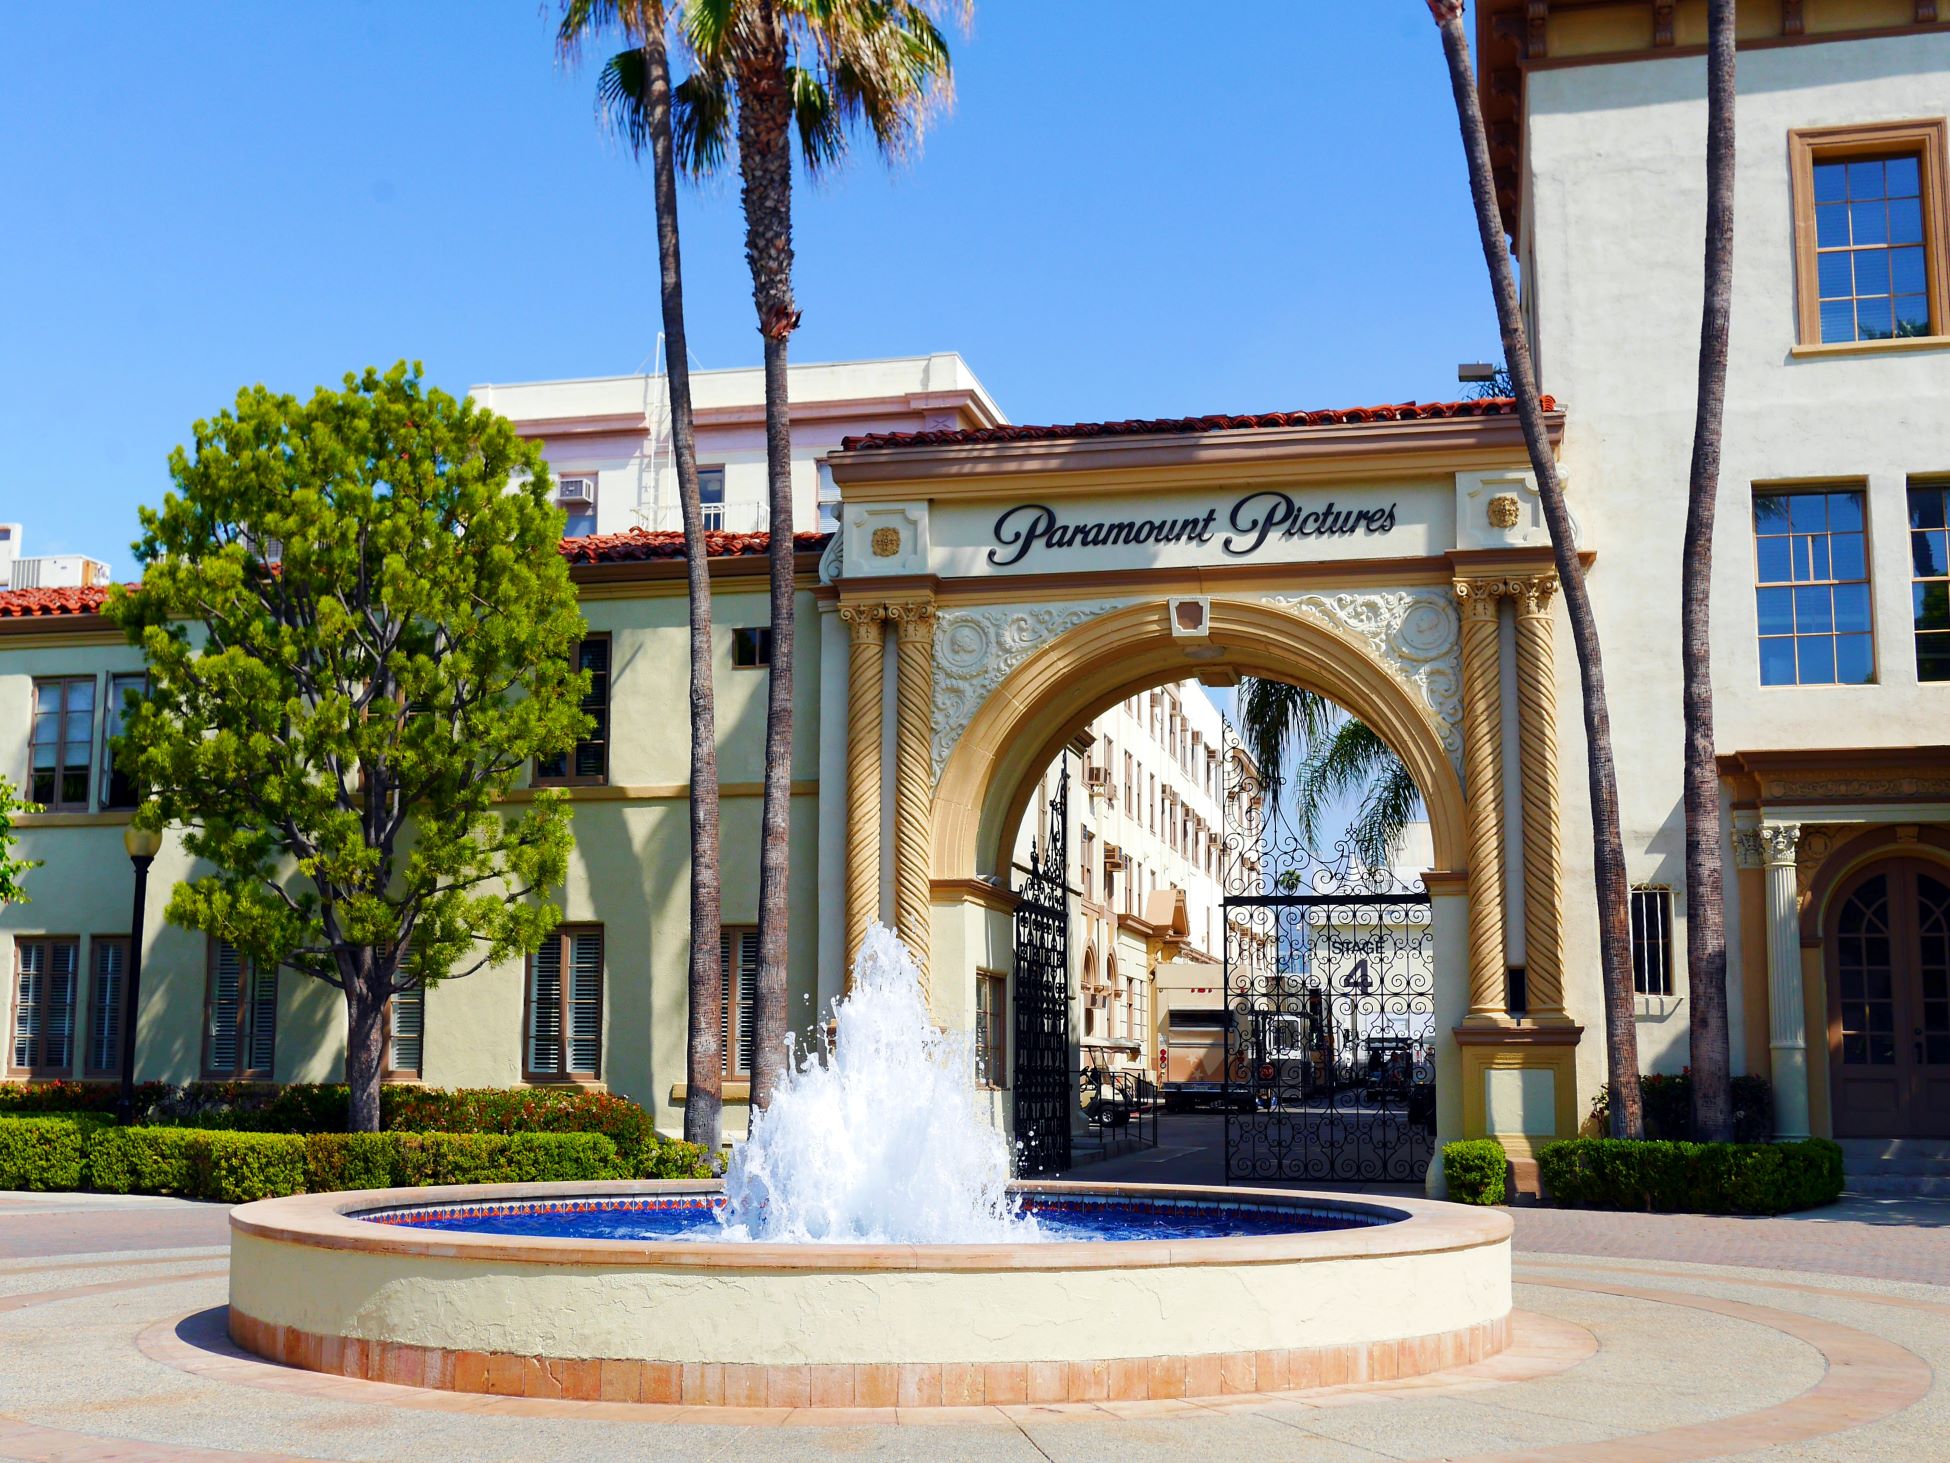 An image of Paramount Pictures.